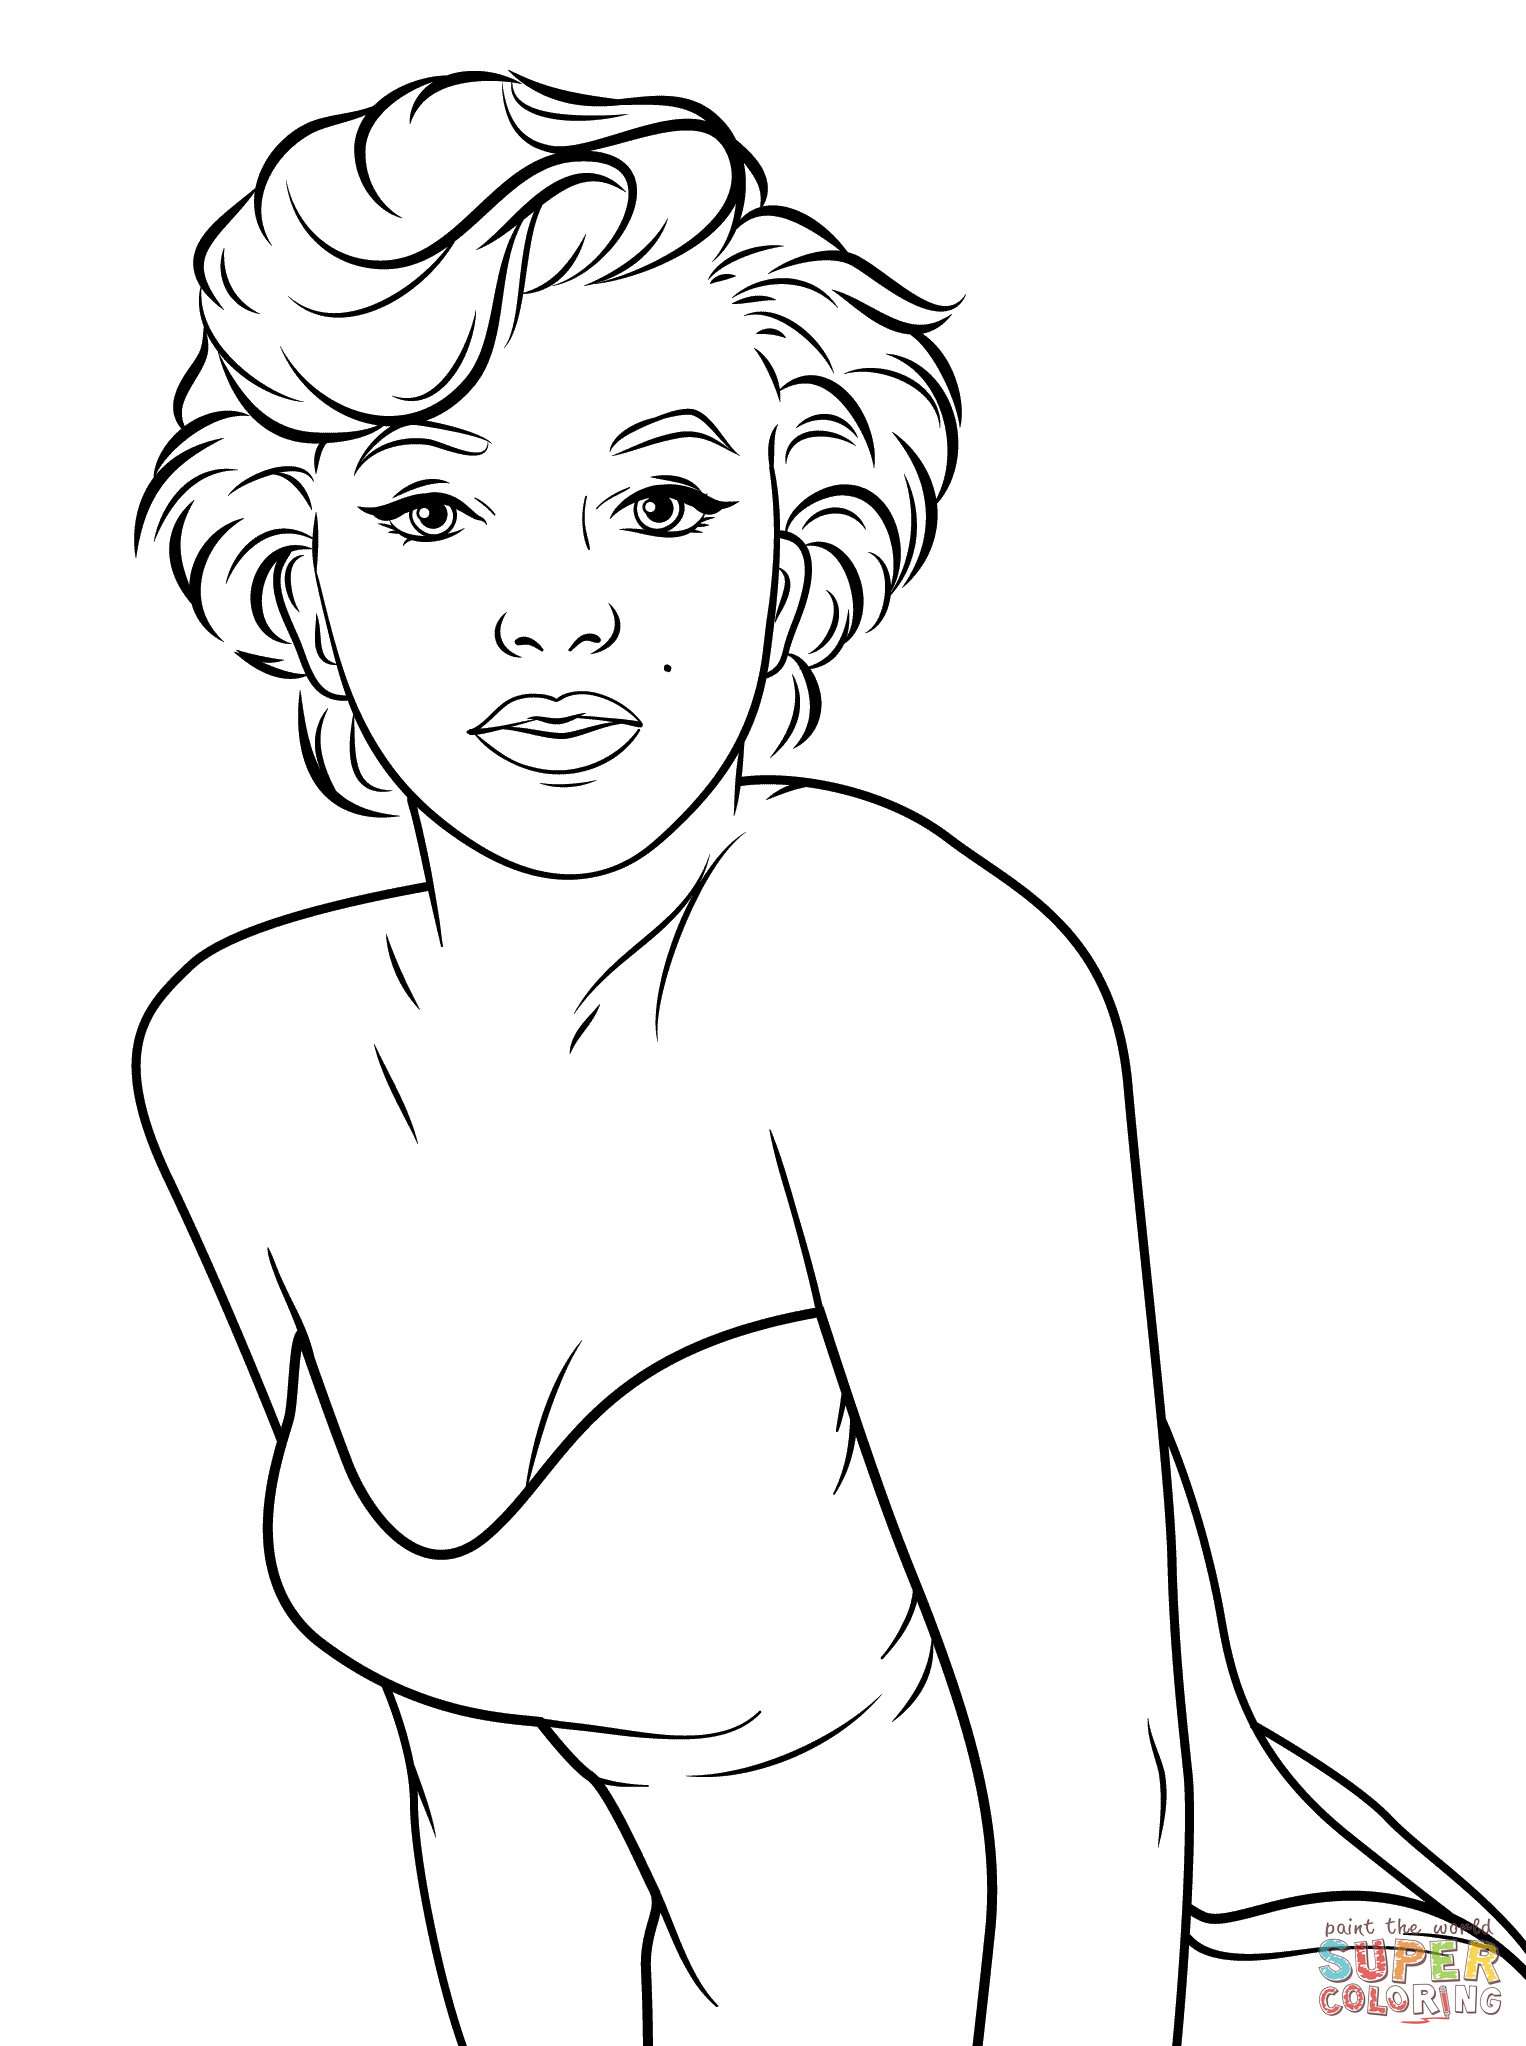 98. Found. coloring page images for 'Marilyn monroe'. 